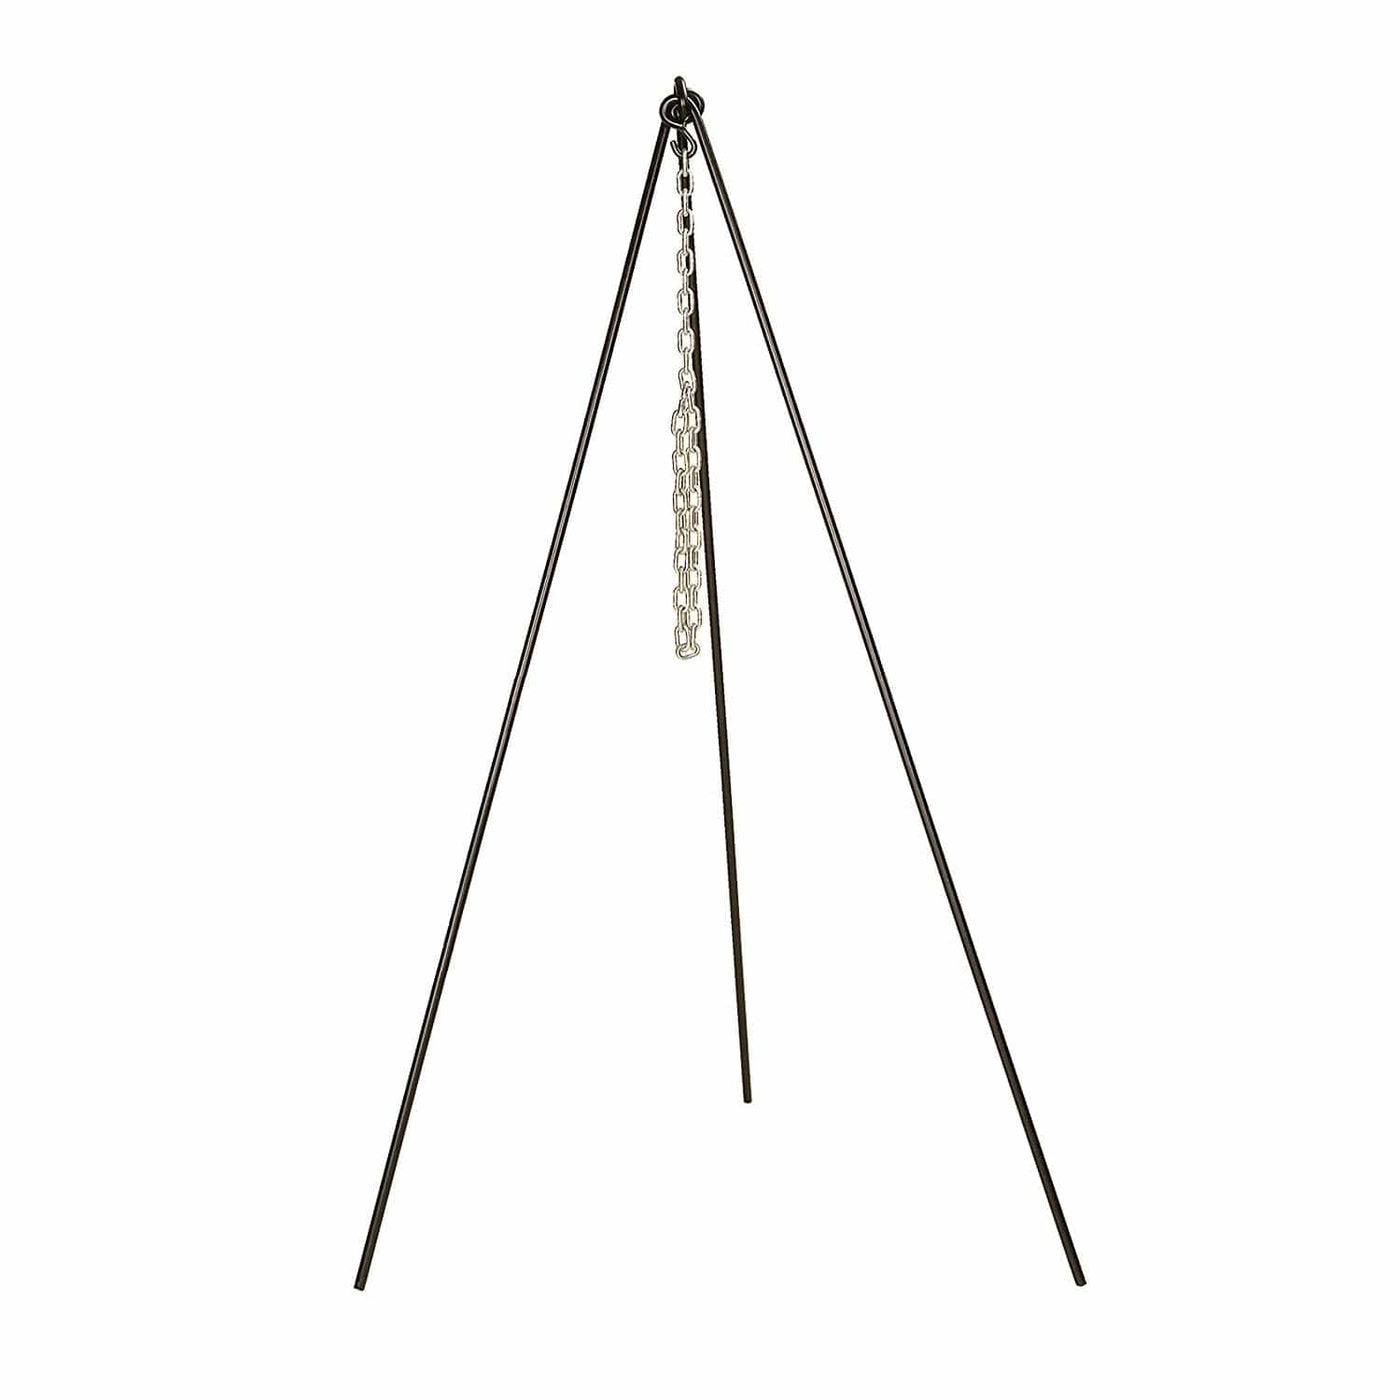 Lodge Cast Iron Lodge Tall Boy Tripod 60in Camping And Outdoor